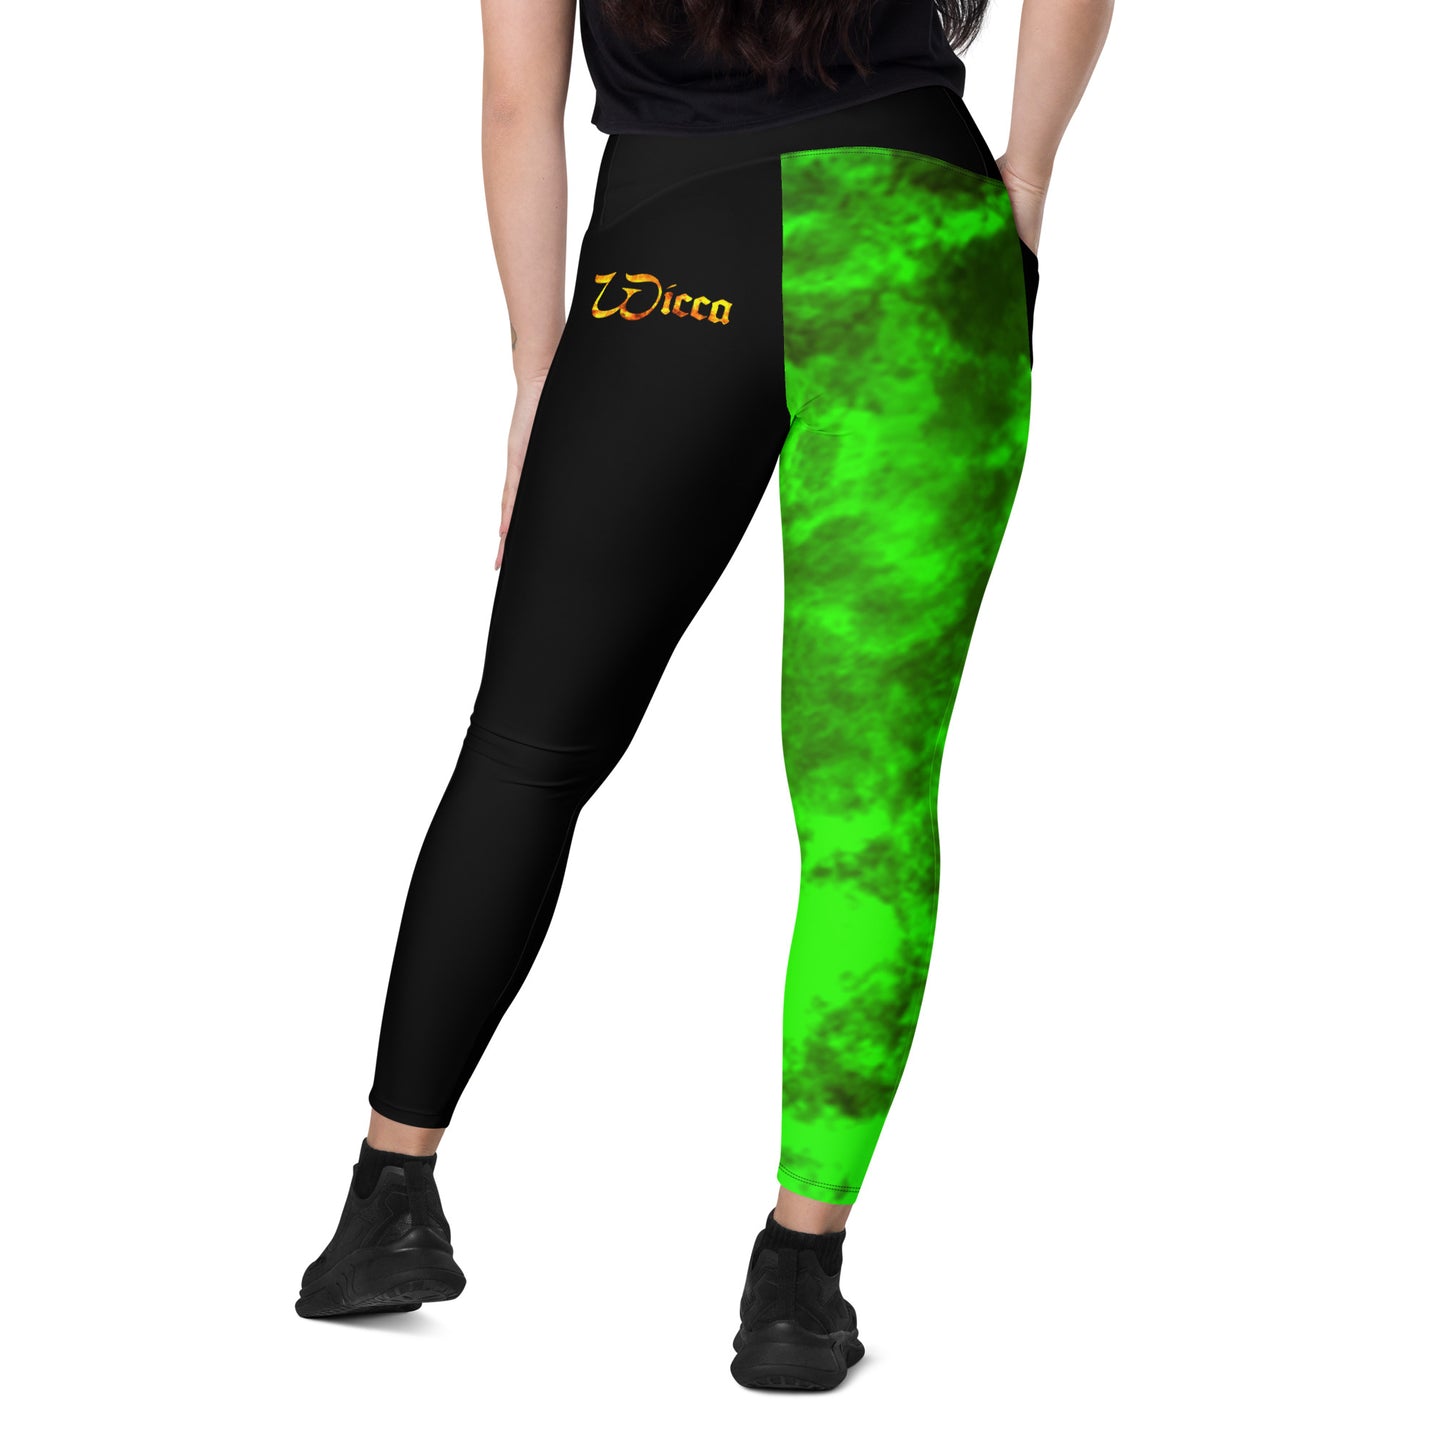 Wicca Green Half Leggings with pockets